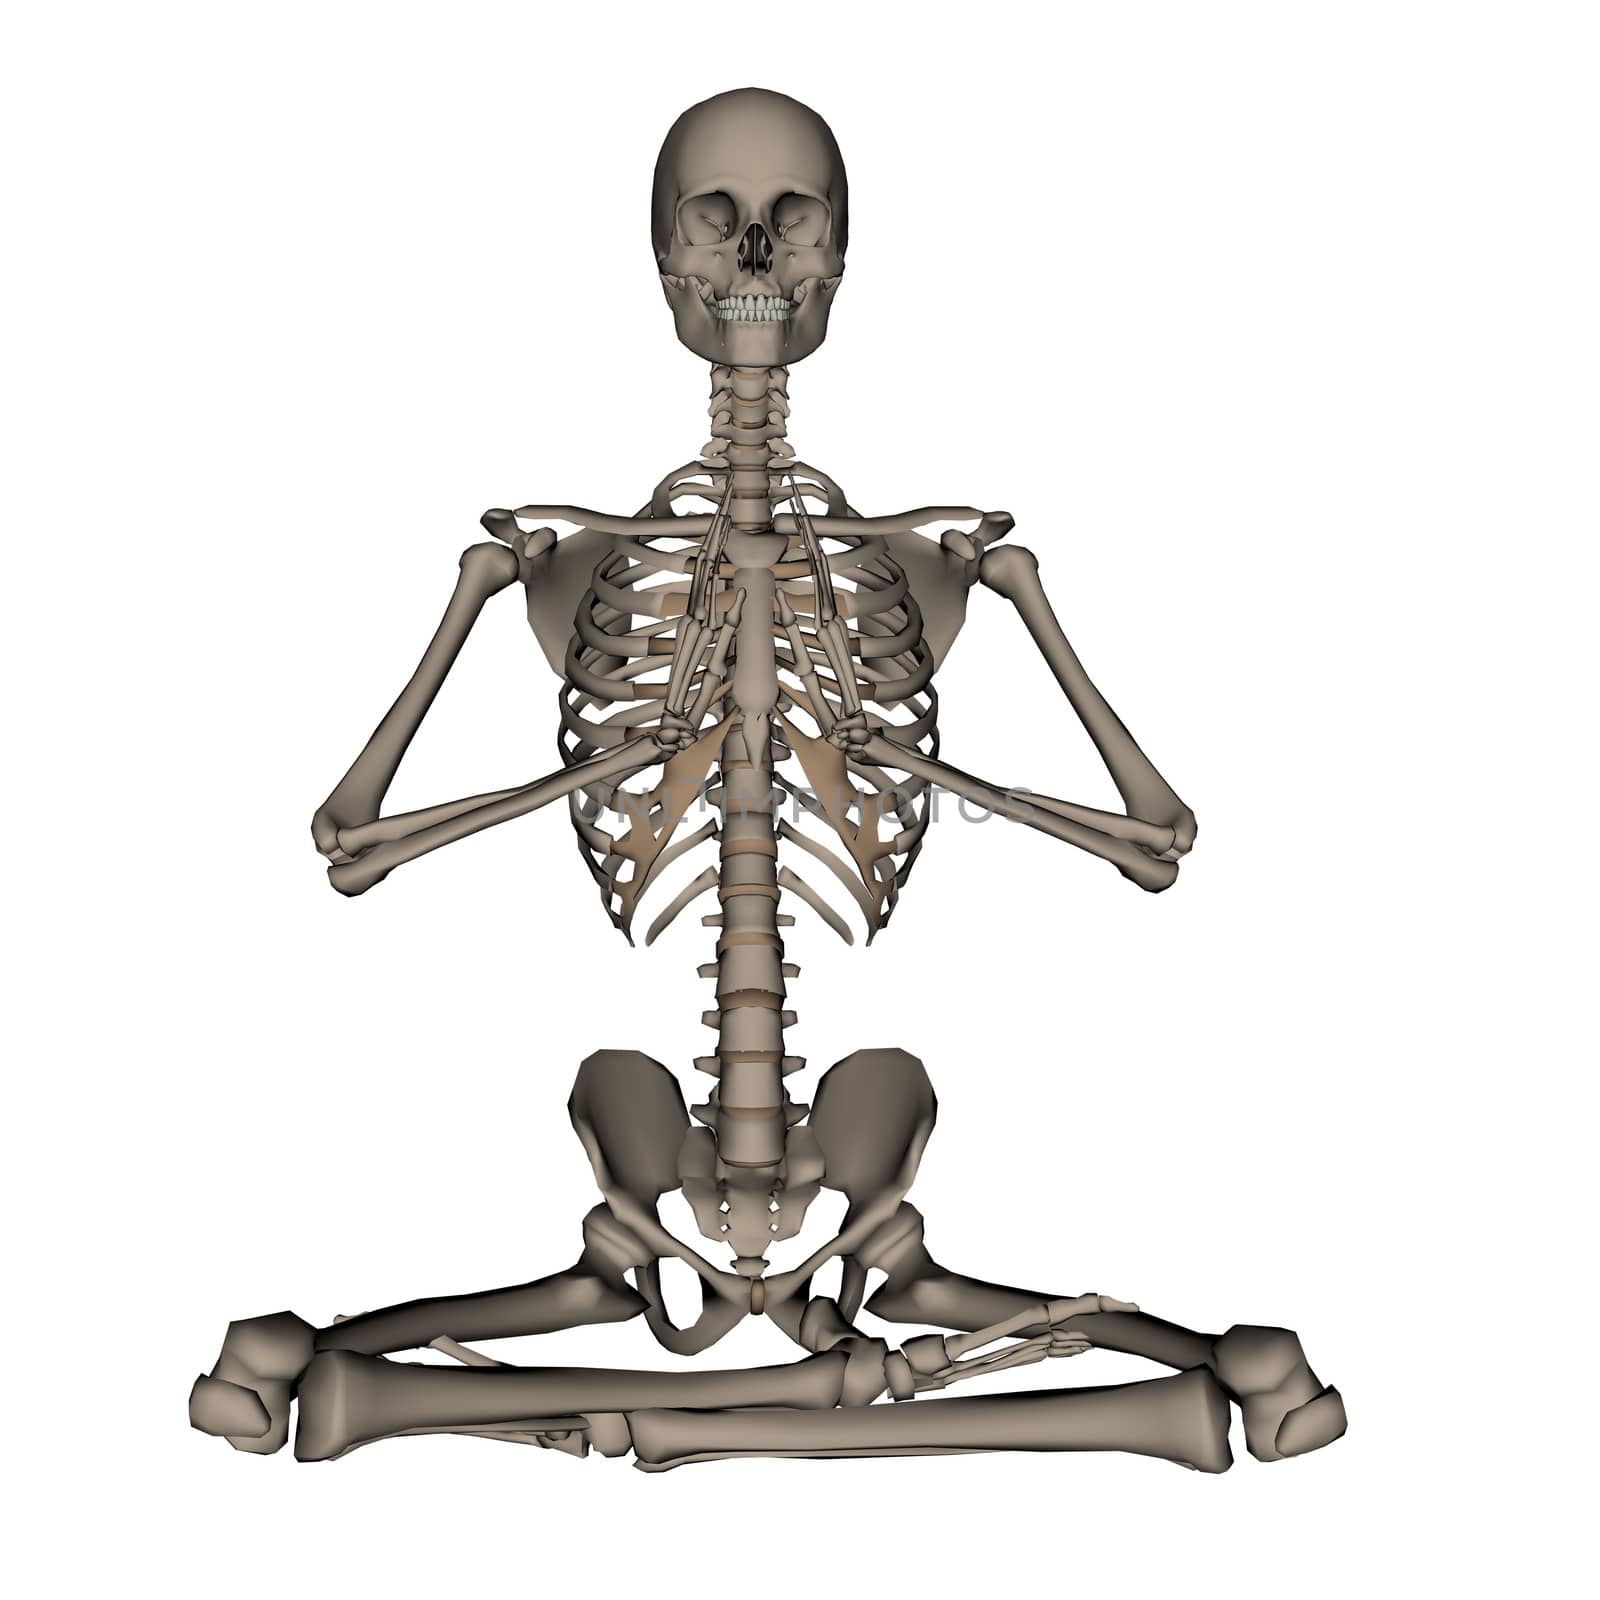 Frontview of human skeleton meditation isolated in white background - 3D render